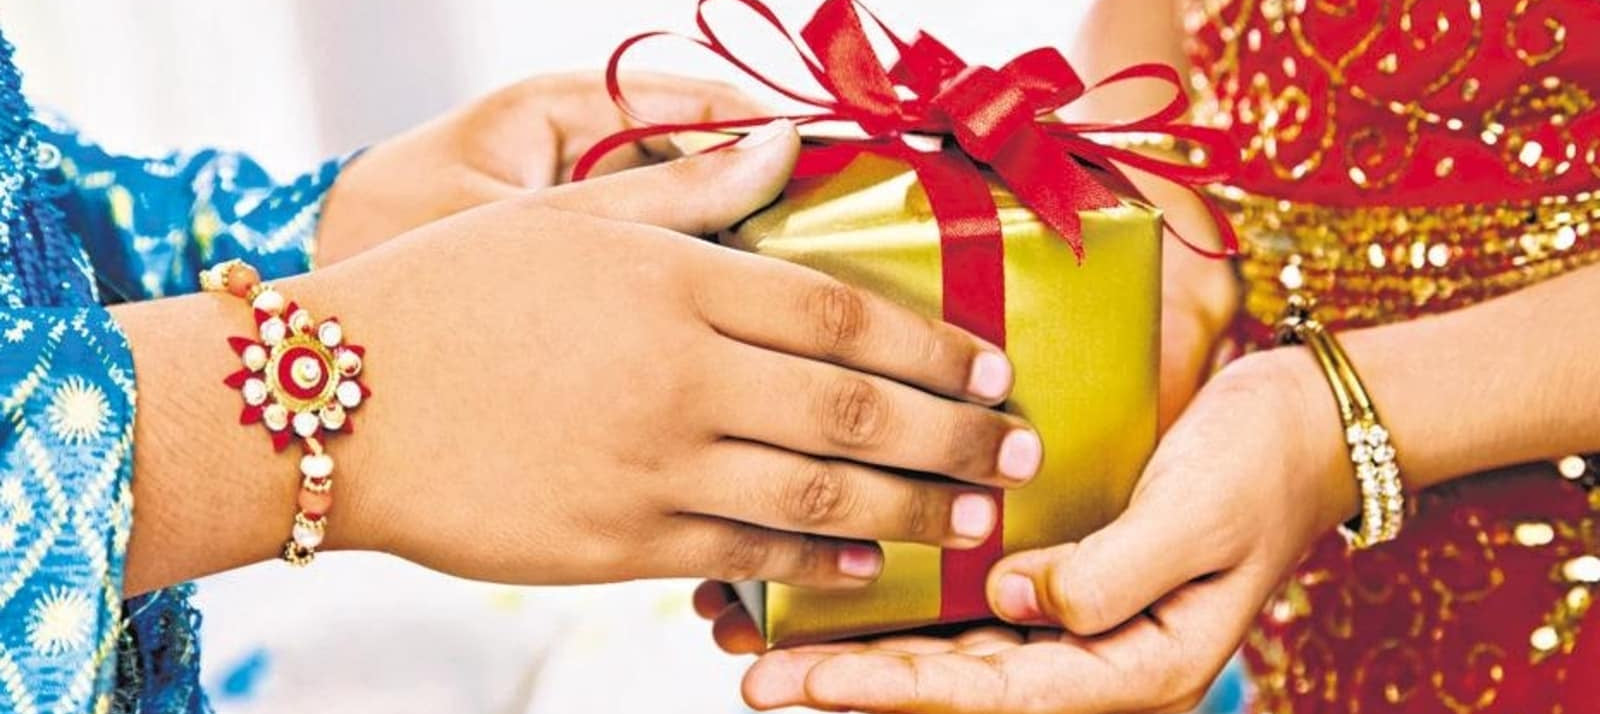 Rakhi Gifts For sisters under 1000: Celebrate this Raksha Bandhan with  Budget-friendly Rakhi gifts for sister under 1000 - The Economic Times